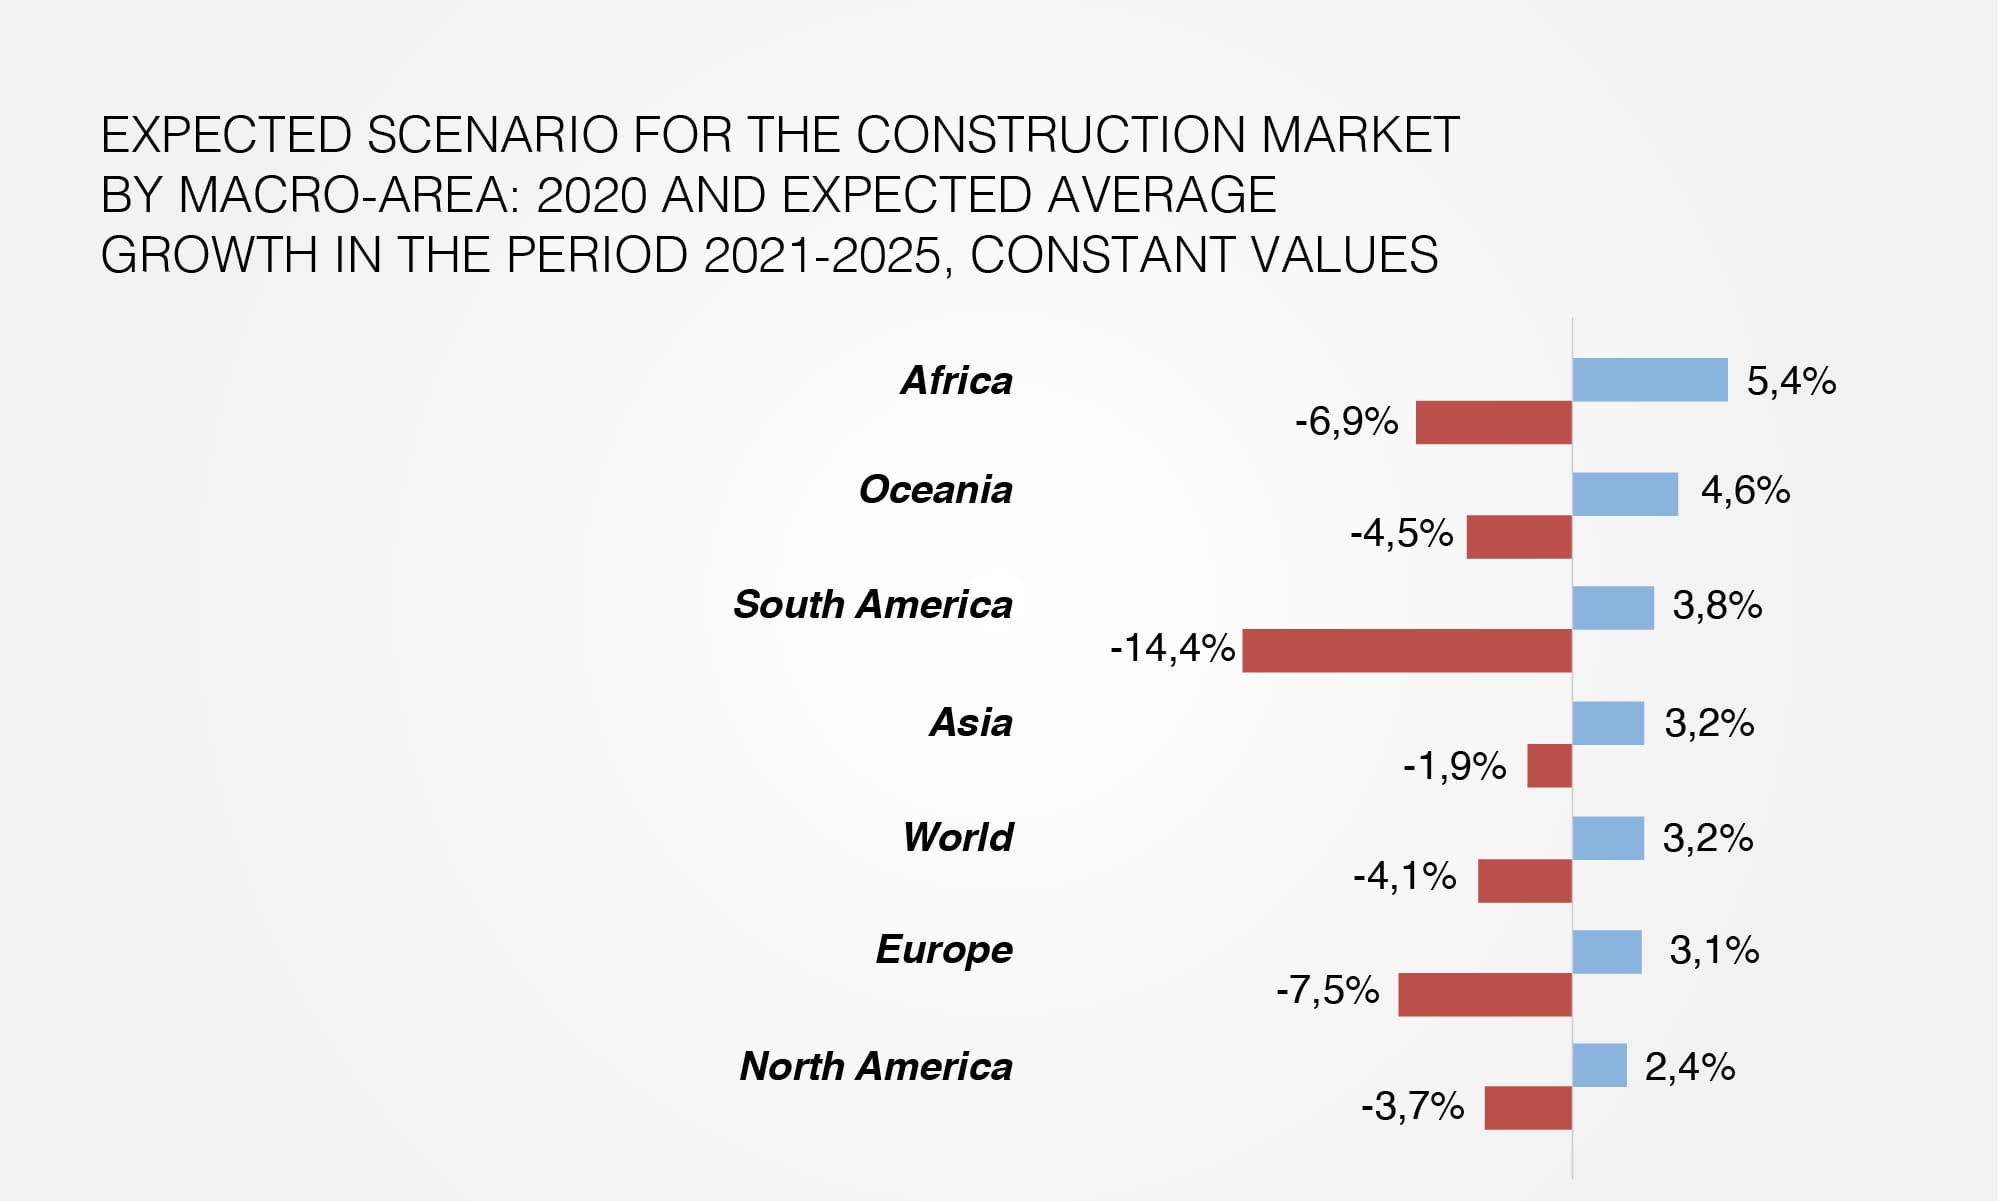 Expected scenario for the construction market by macro-area: 2020 and expected average growth in the period 2021-2025, constant values